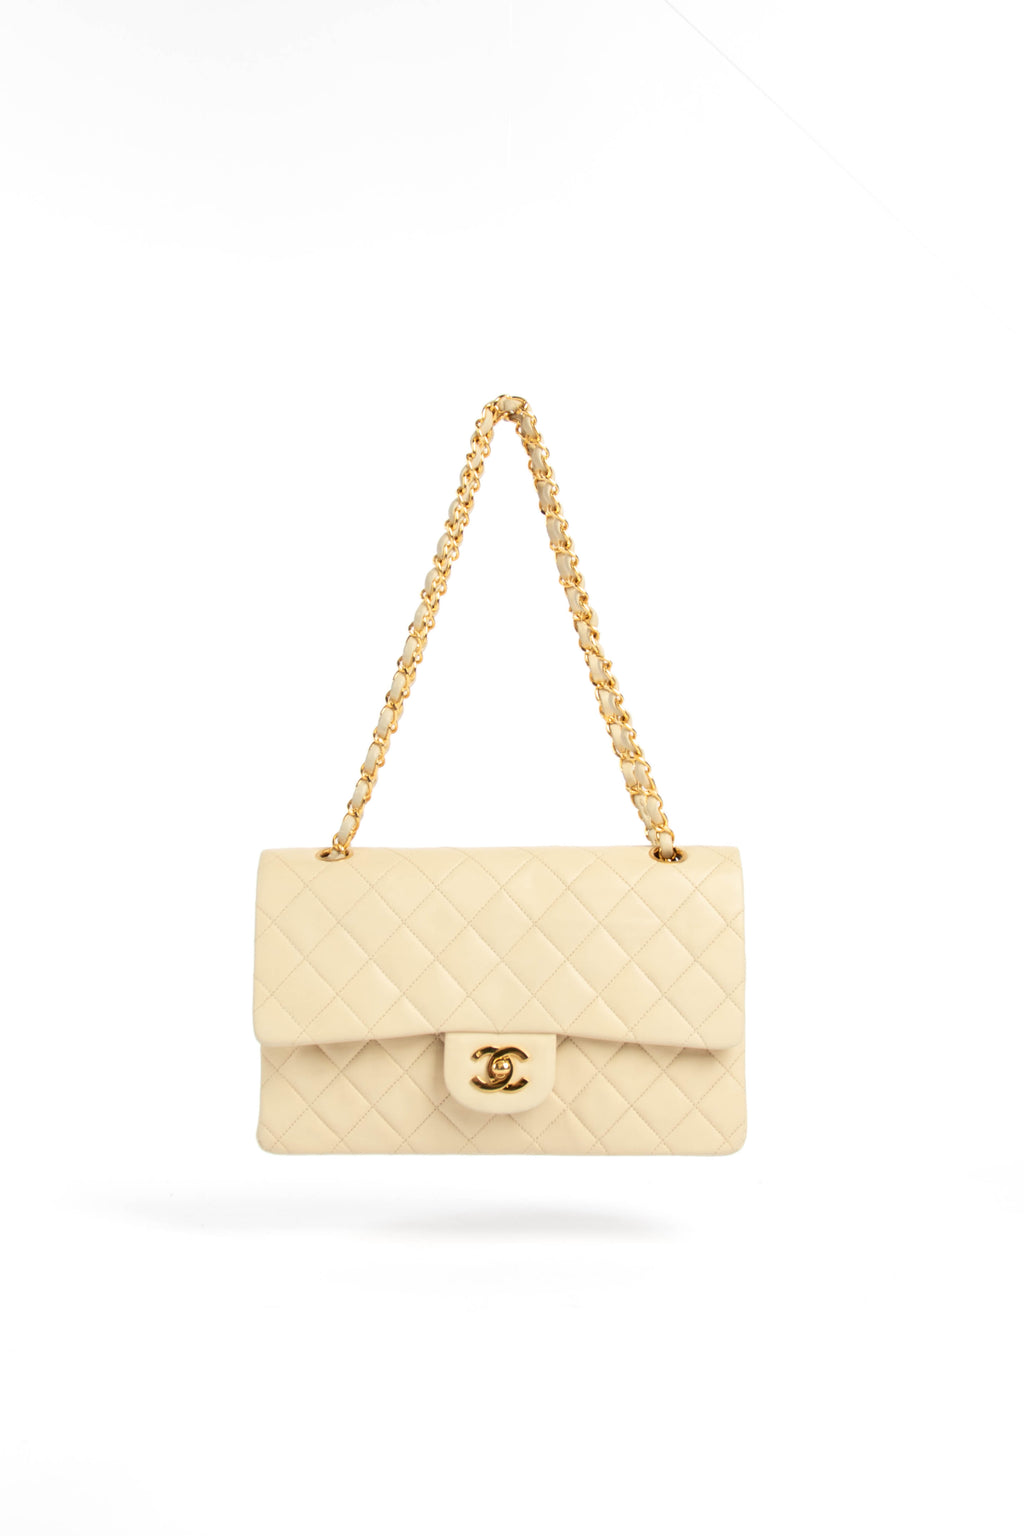 90s Chanel Ivory Lambskin Classic Double Flap Shoulder Bag with 24K GHW